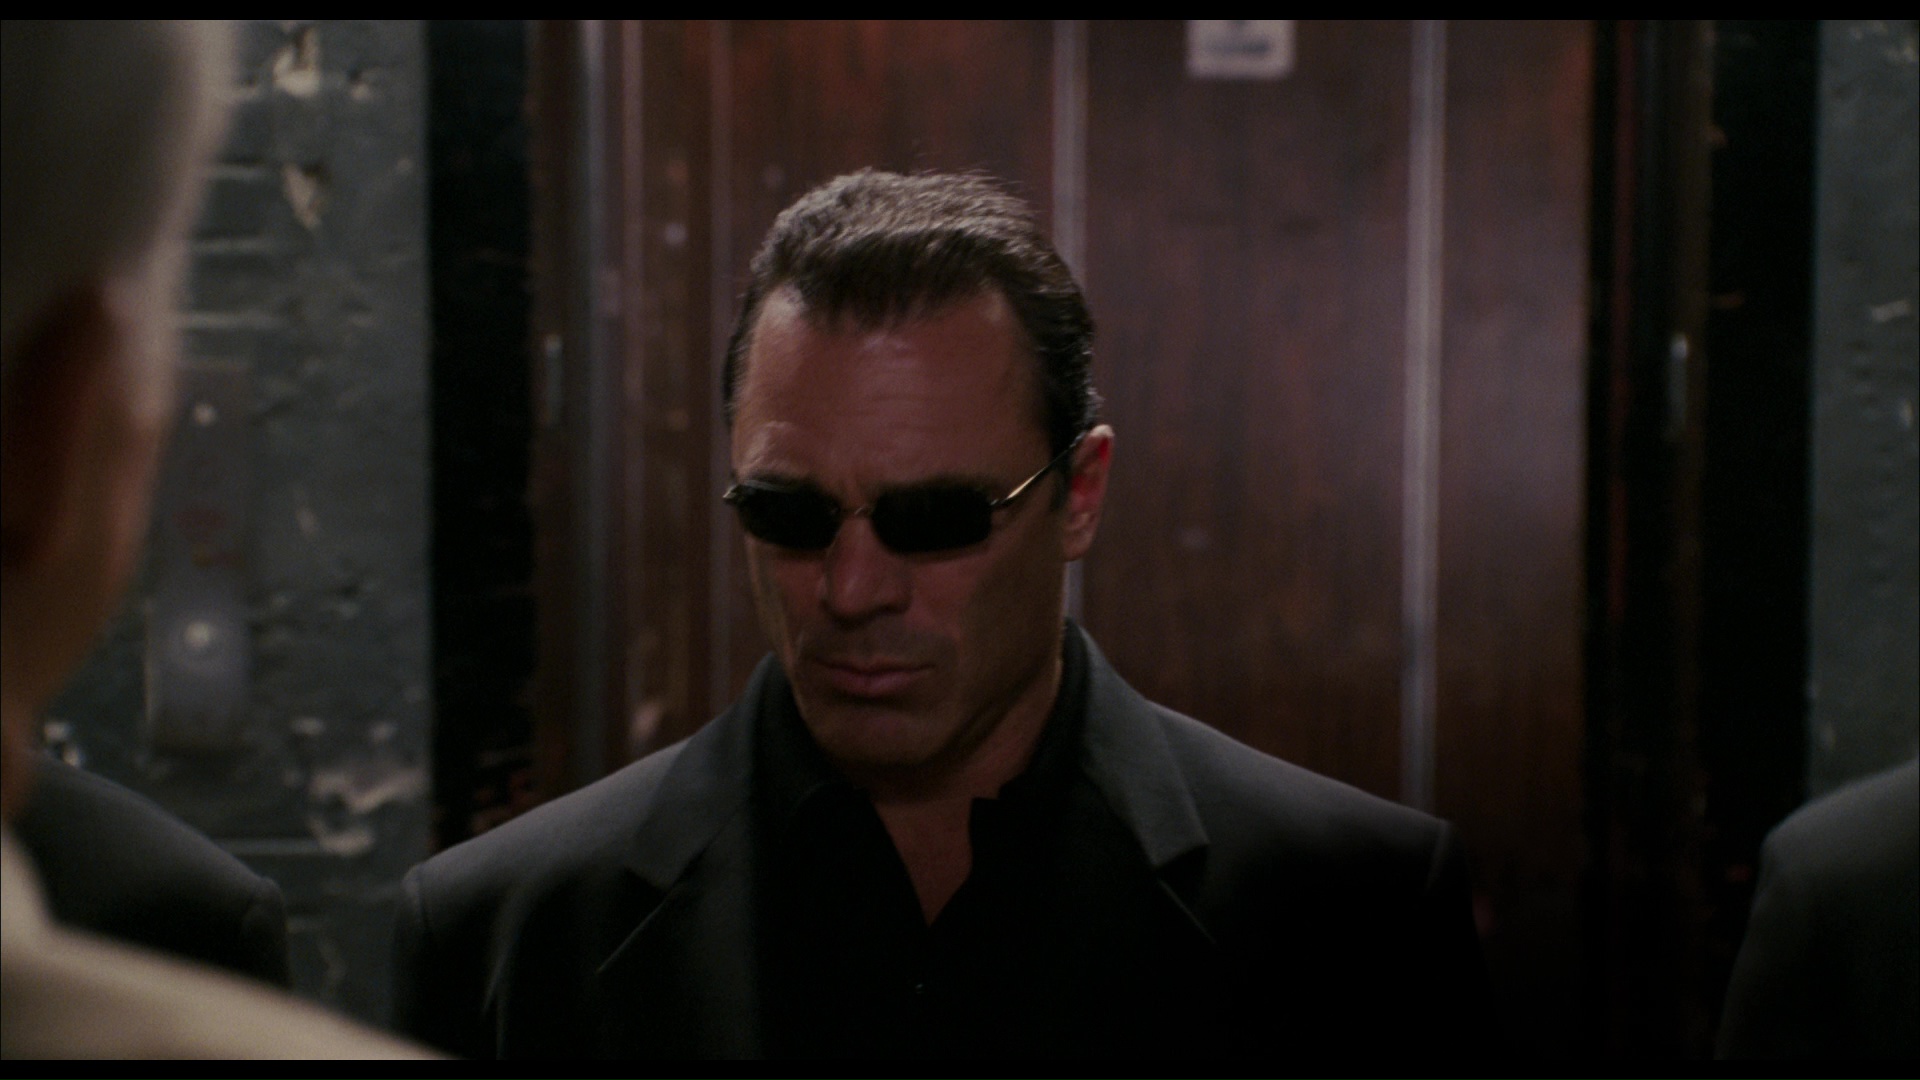 Ray-Ban Men's Sunglasses in The Pink Panther (2006) Movie